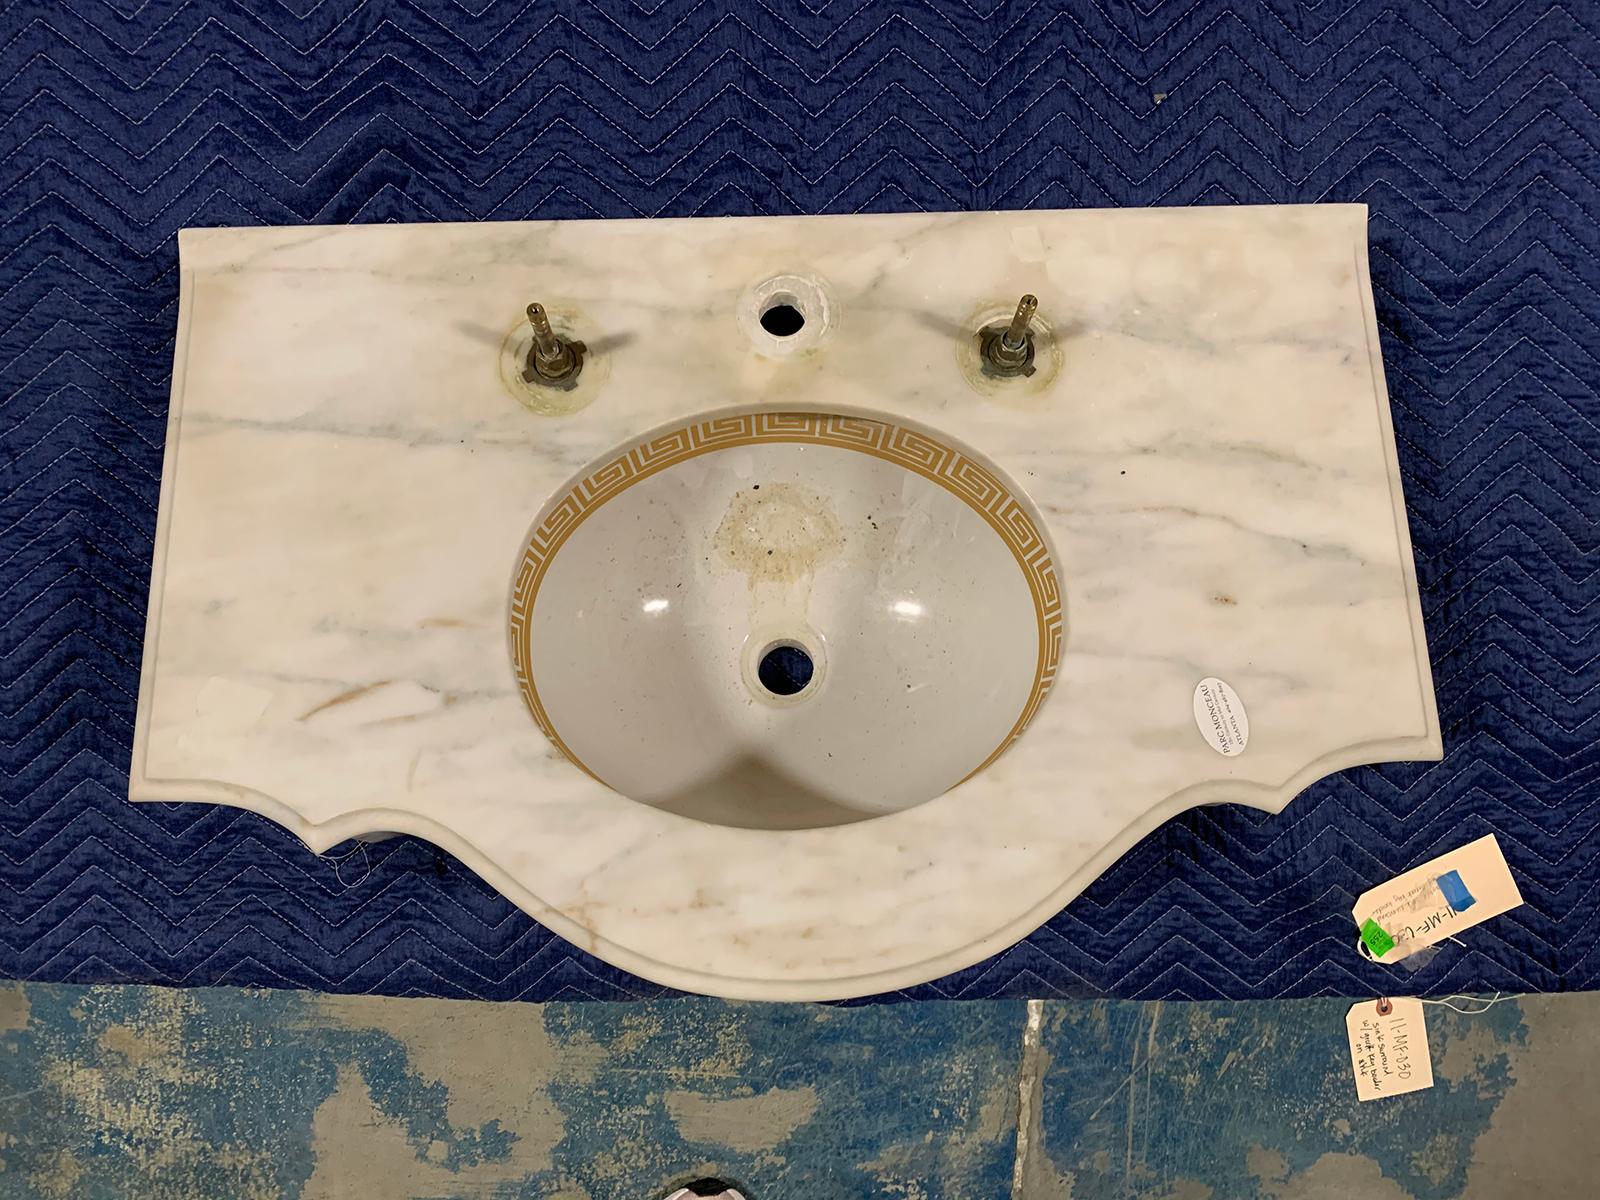 Attributed to Sherle Wagner 20th century circa 1960s marble sink surround with gilt Greek key edging
Has glass legs
Measures: Overall: 32.5” W x 20.5” D x 5” T. The bowl itself measures 14” W x 11” D x 8.75” T.